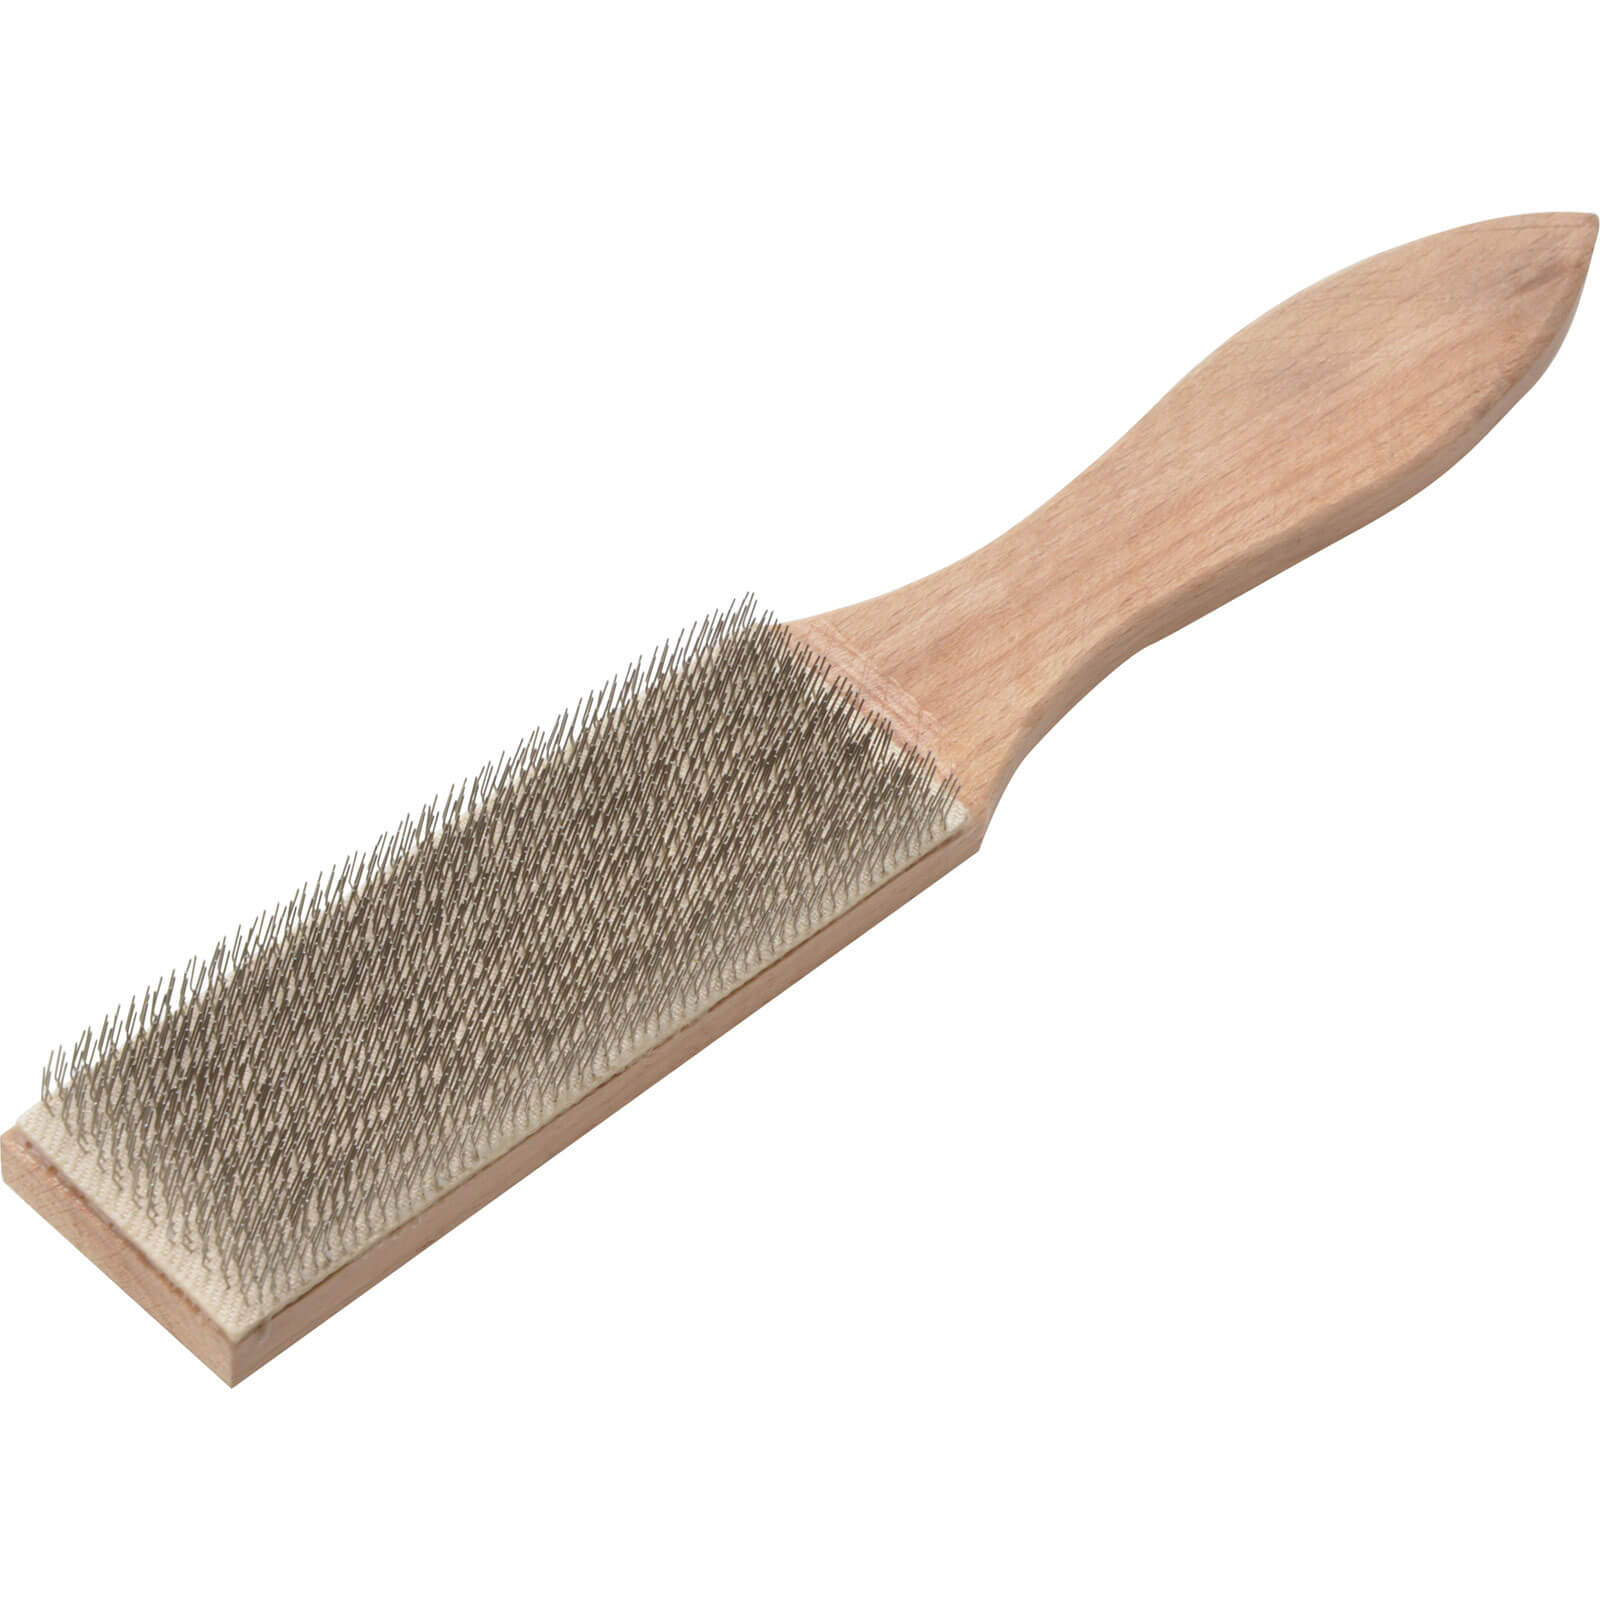 Photo of Lessmann Steel File Cleaning Brush